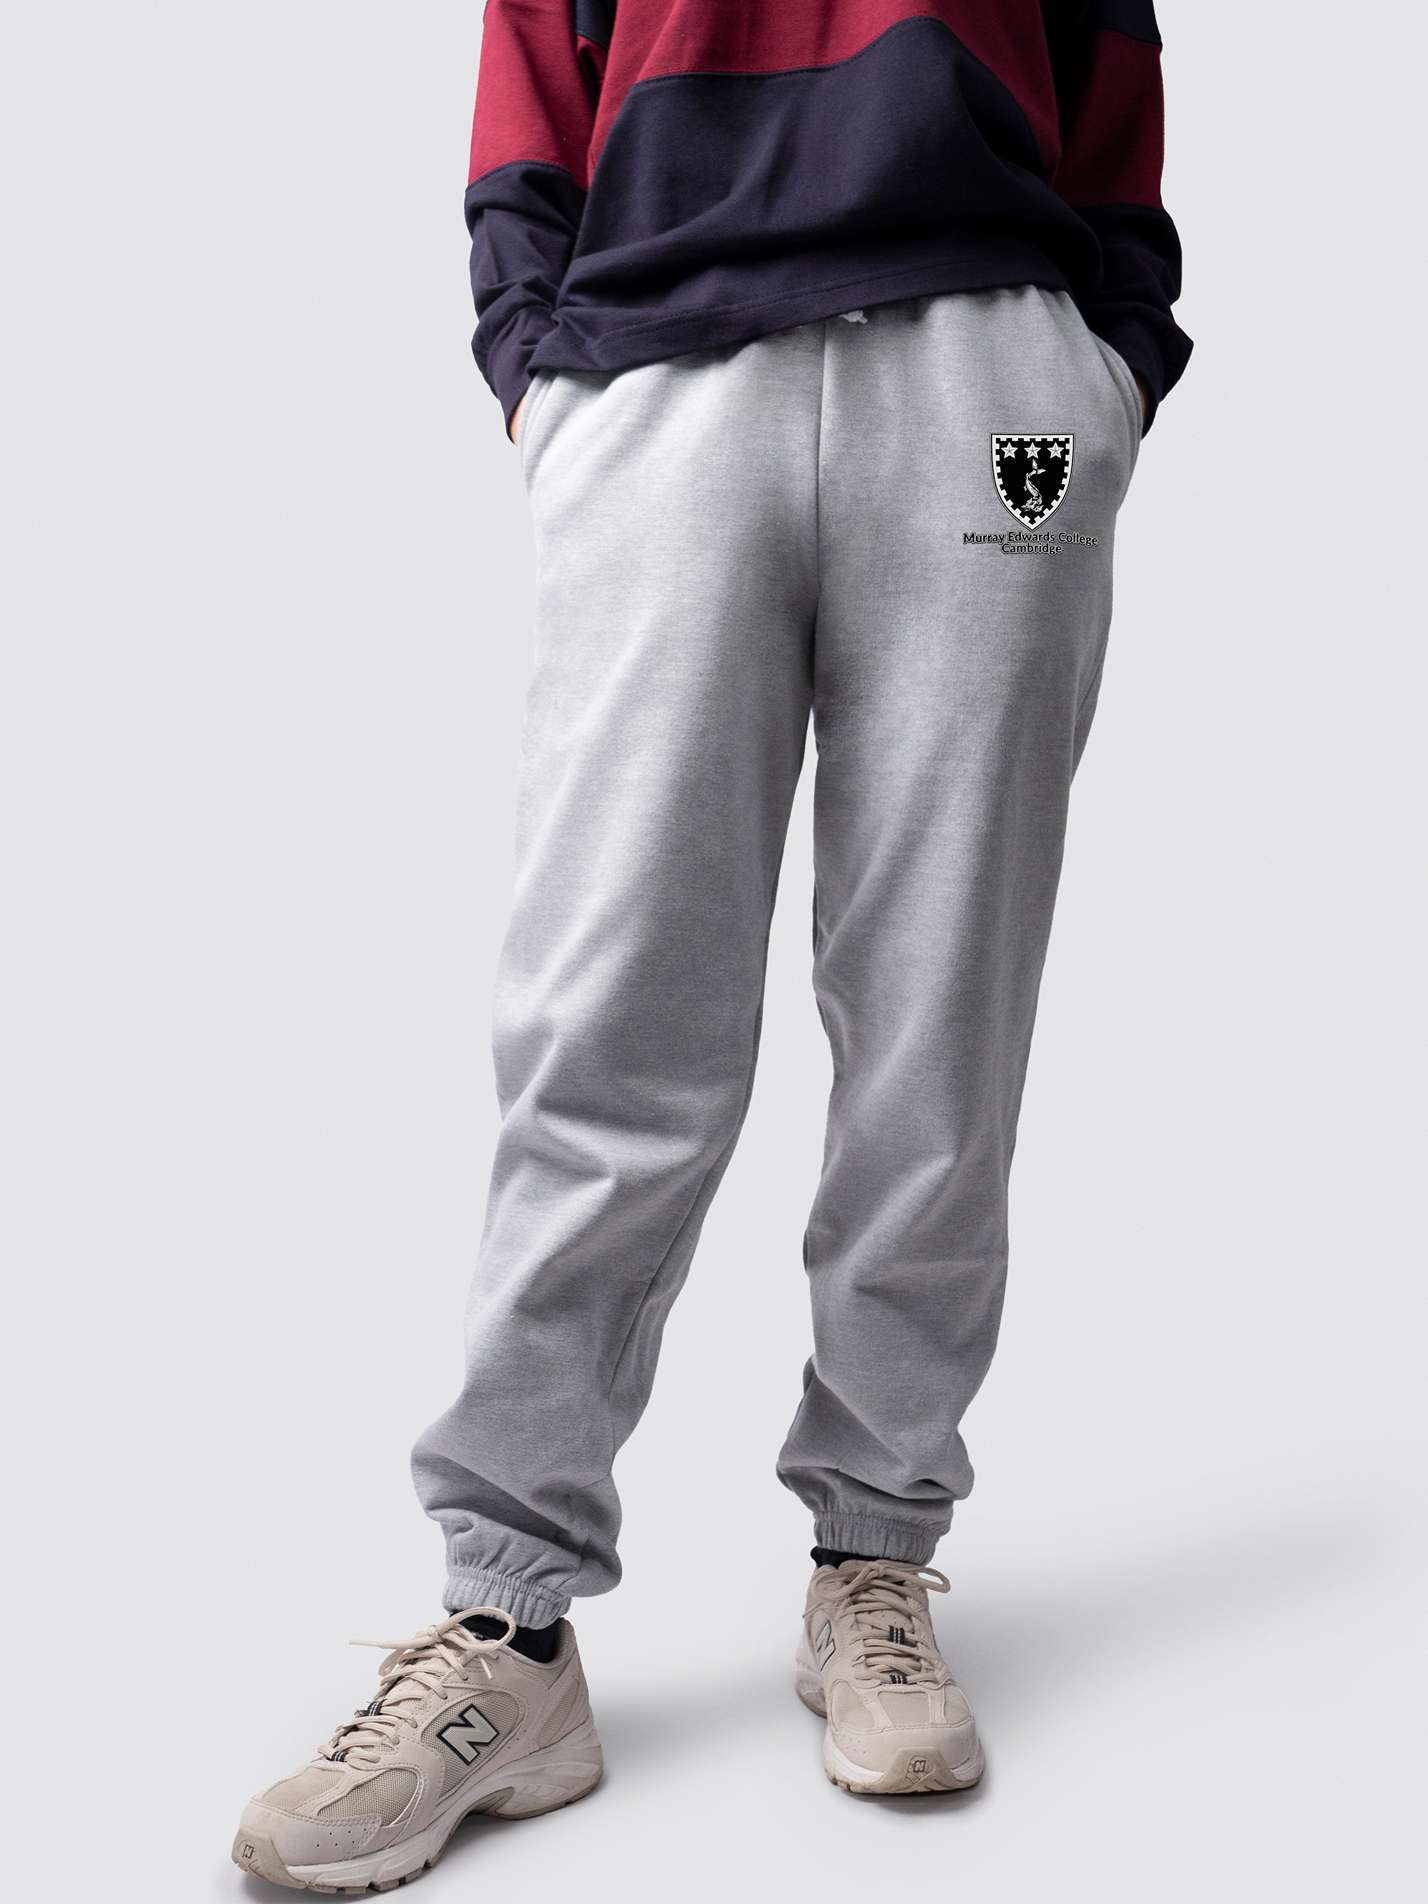 undergraduate cuffed sweatpants, made from soft cotton fabric, with Murray Edwards logo